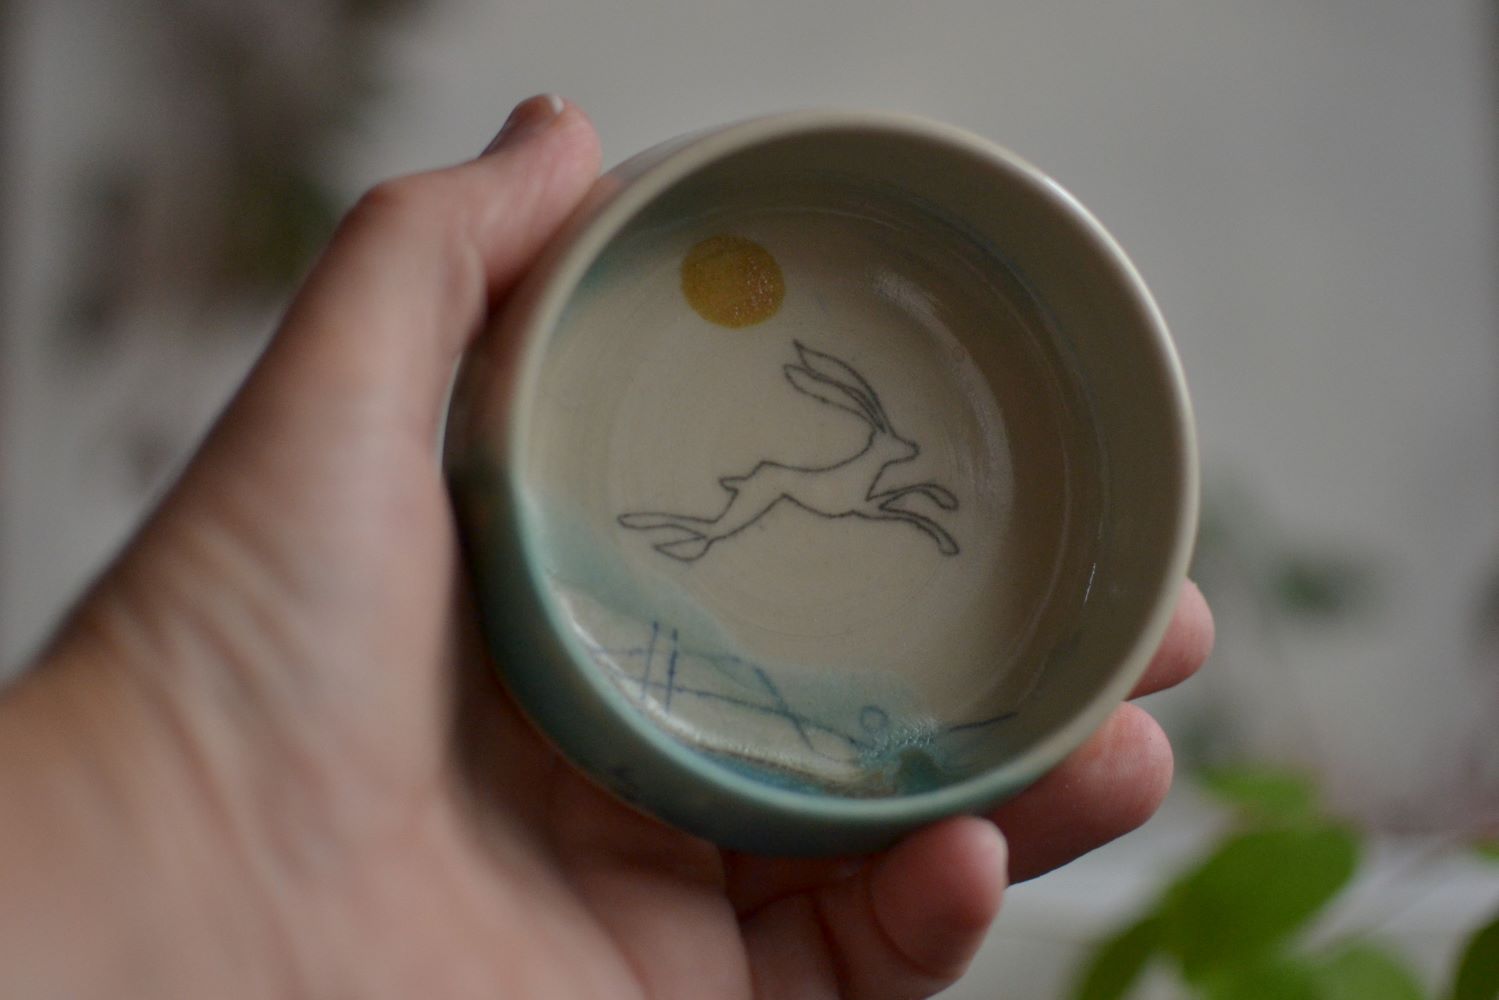 A hand holding a handmade ceramics dish with an image of a hare running across it.